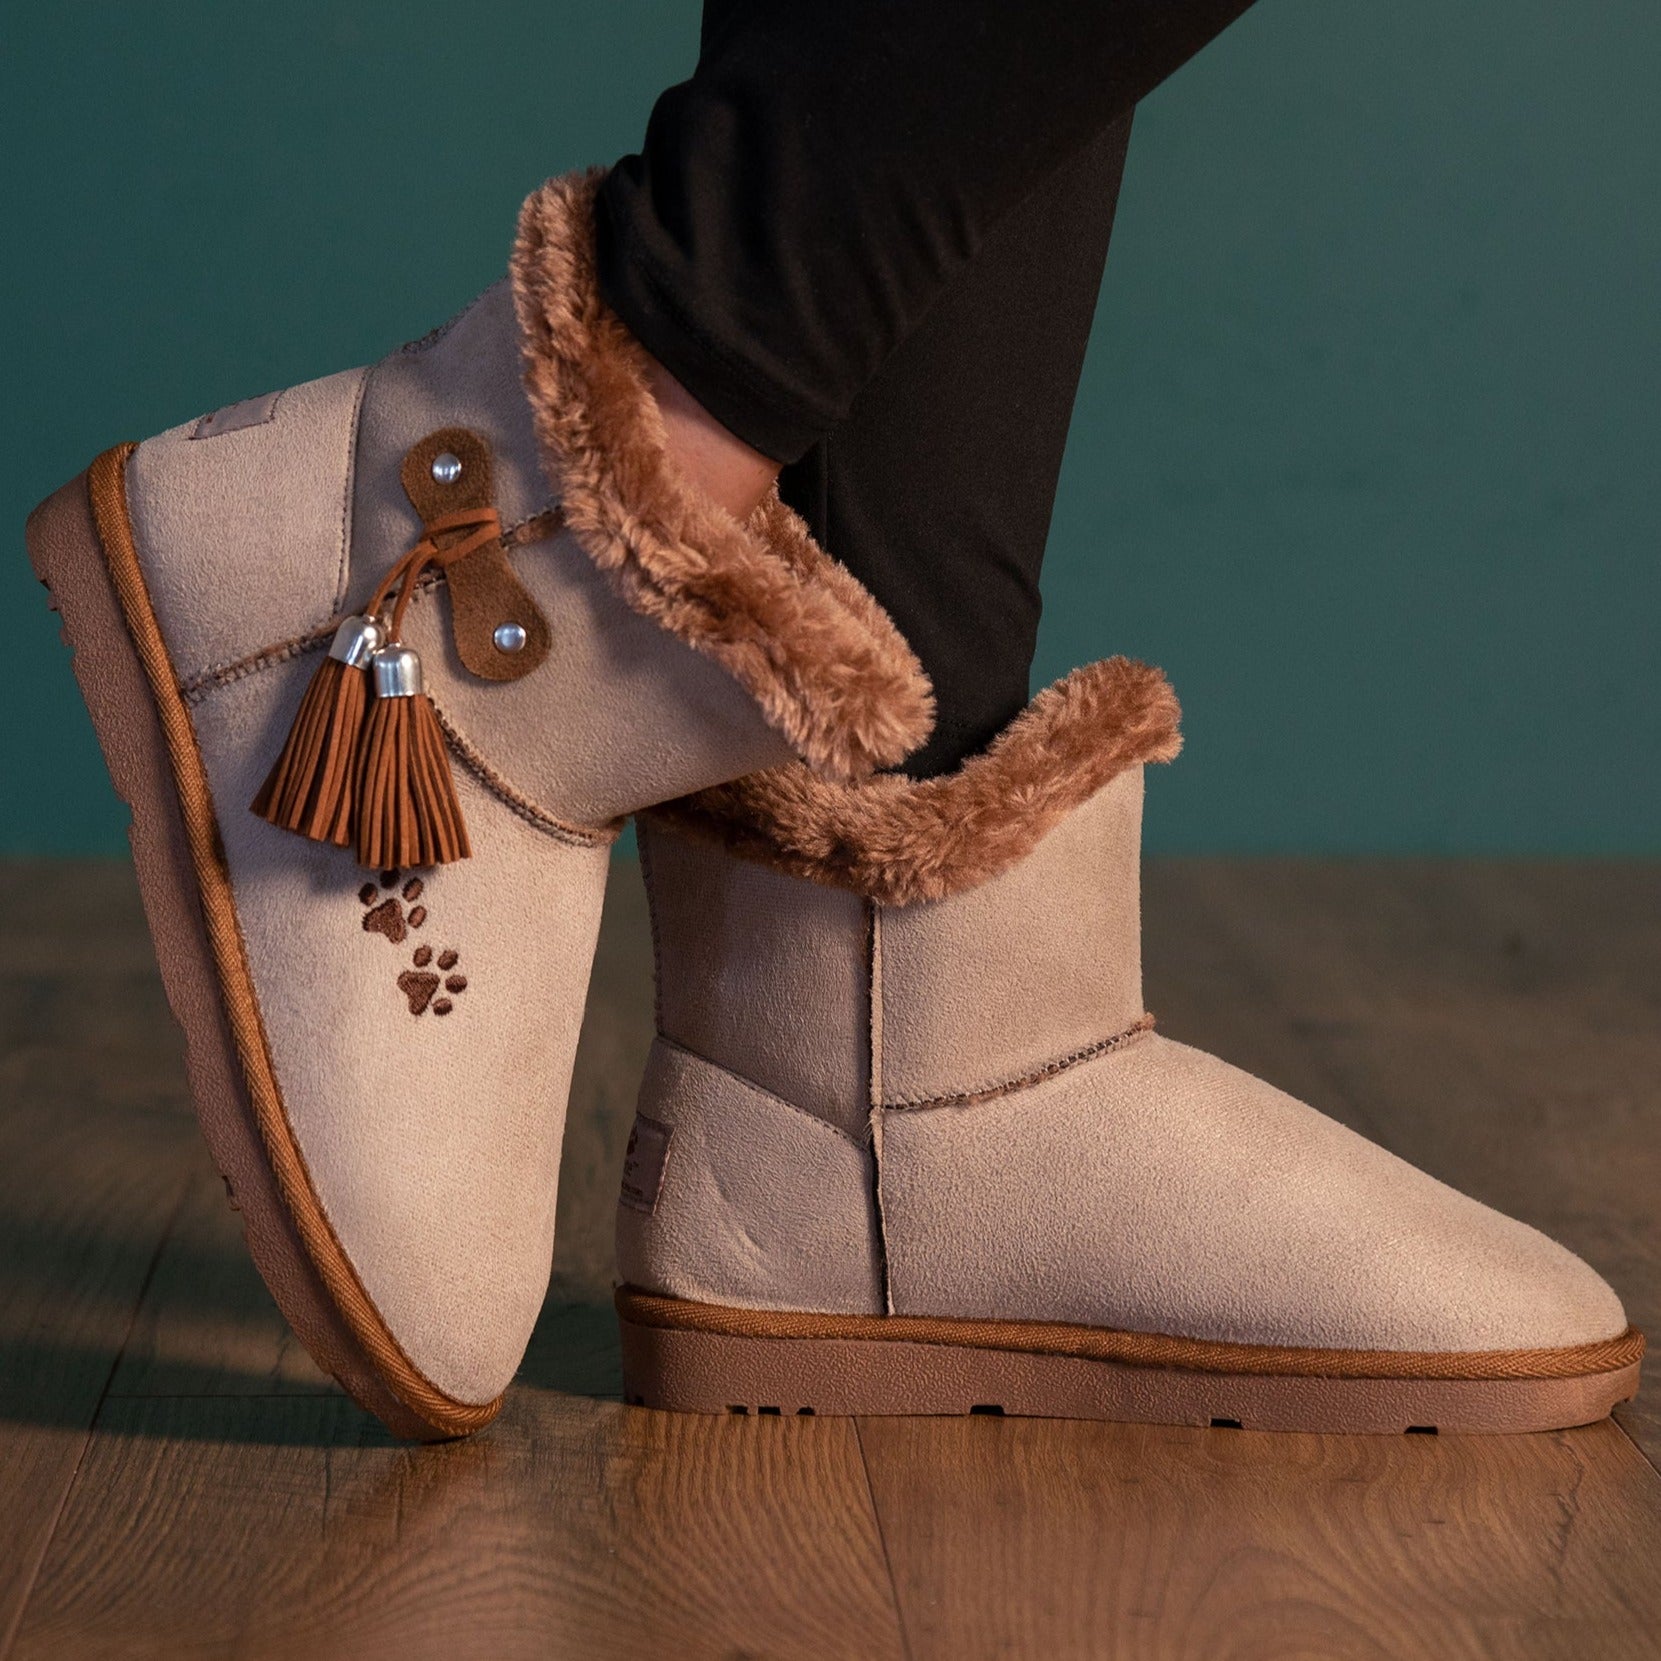 Paw Print Faux Suede Boots With Tassels - Tan - 10